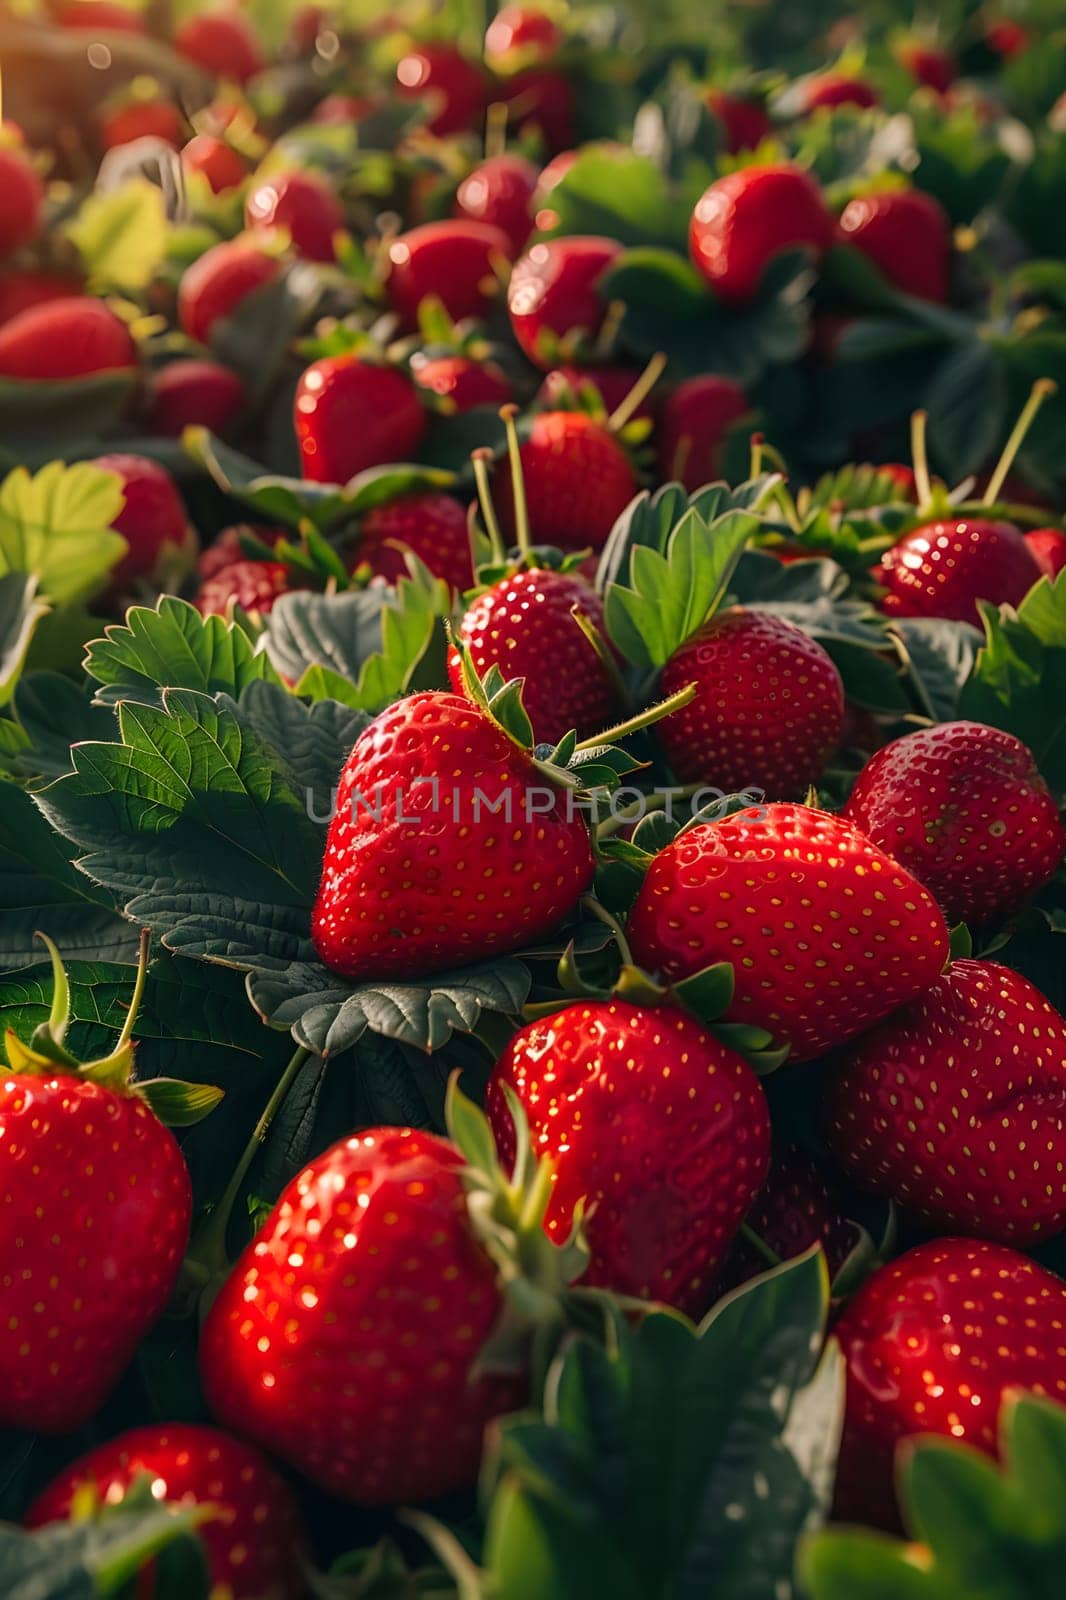 Delight in the sight of seedless strawberries growing on a bush in a natural field. These superfood berries are a delicious, plantbased fruit full of health benefits